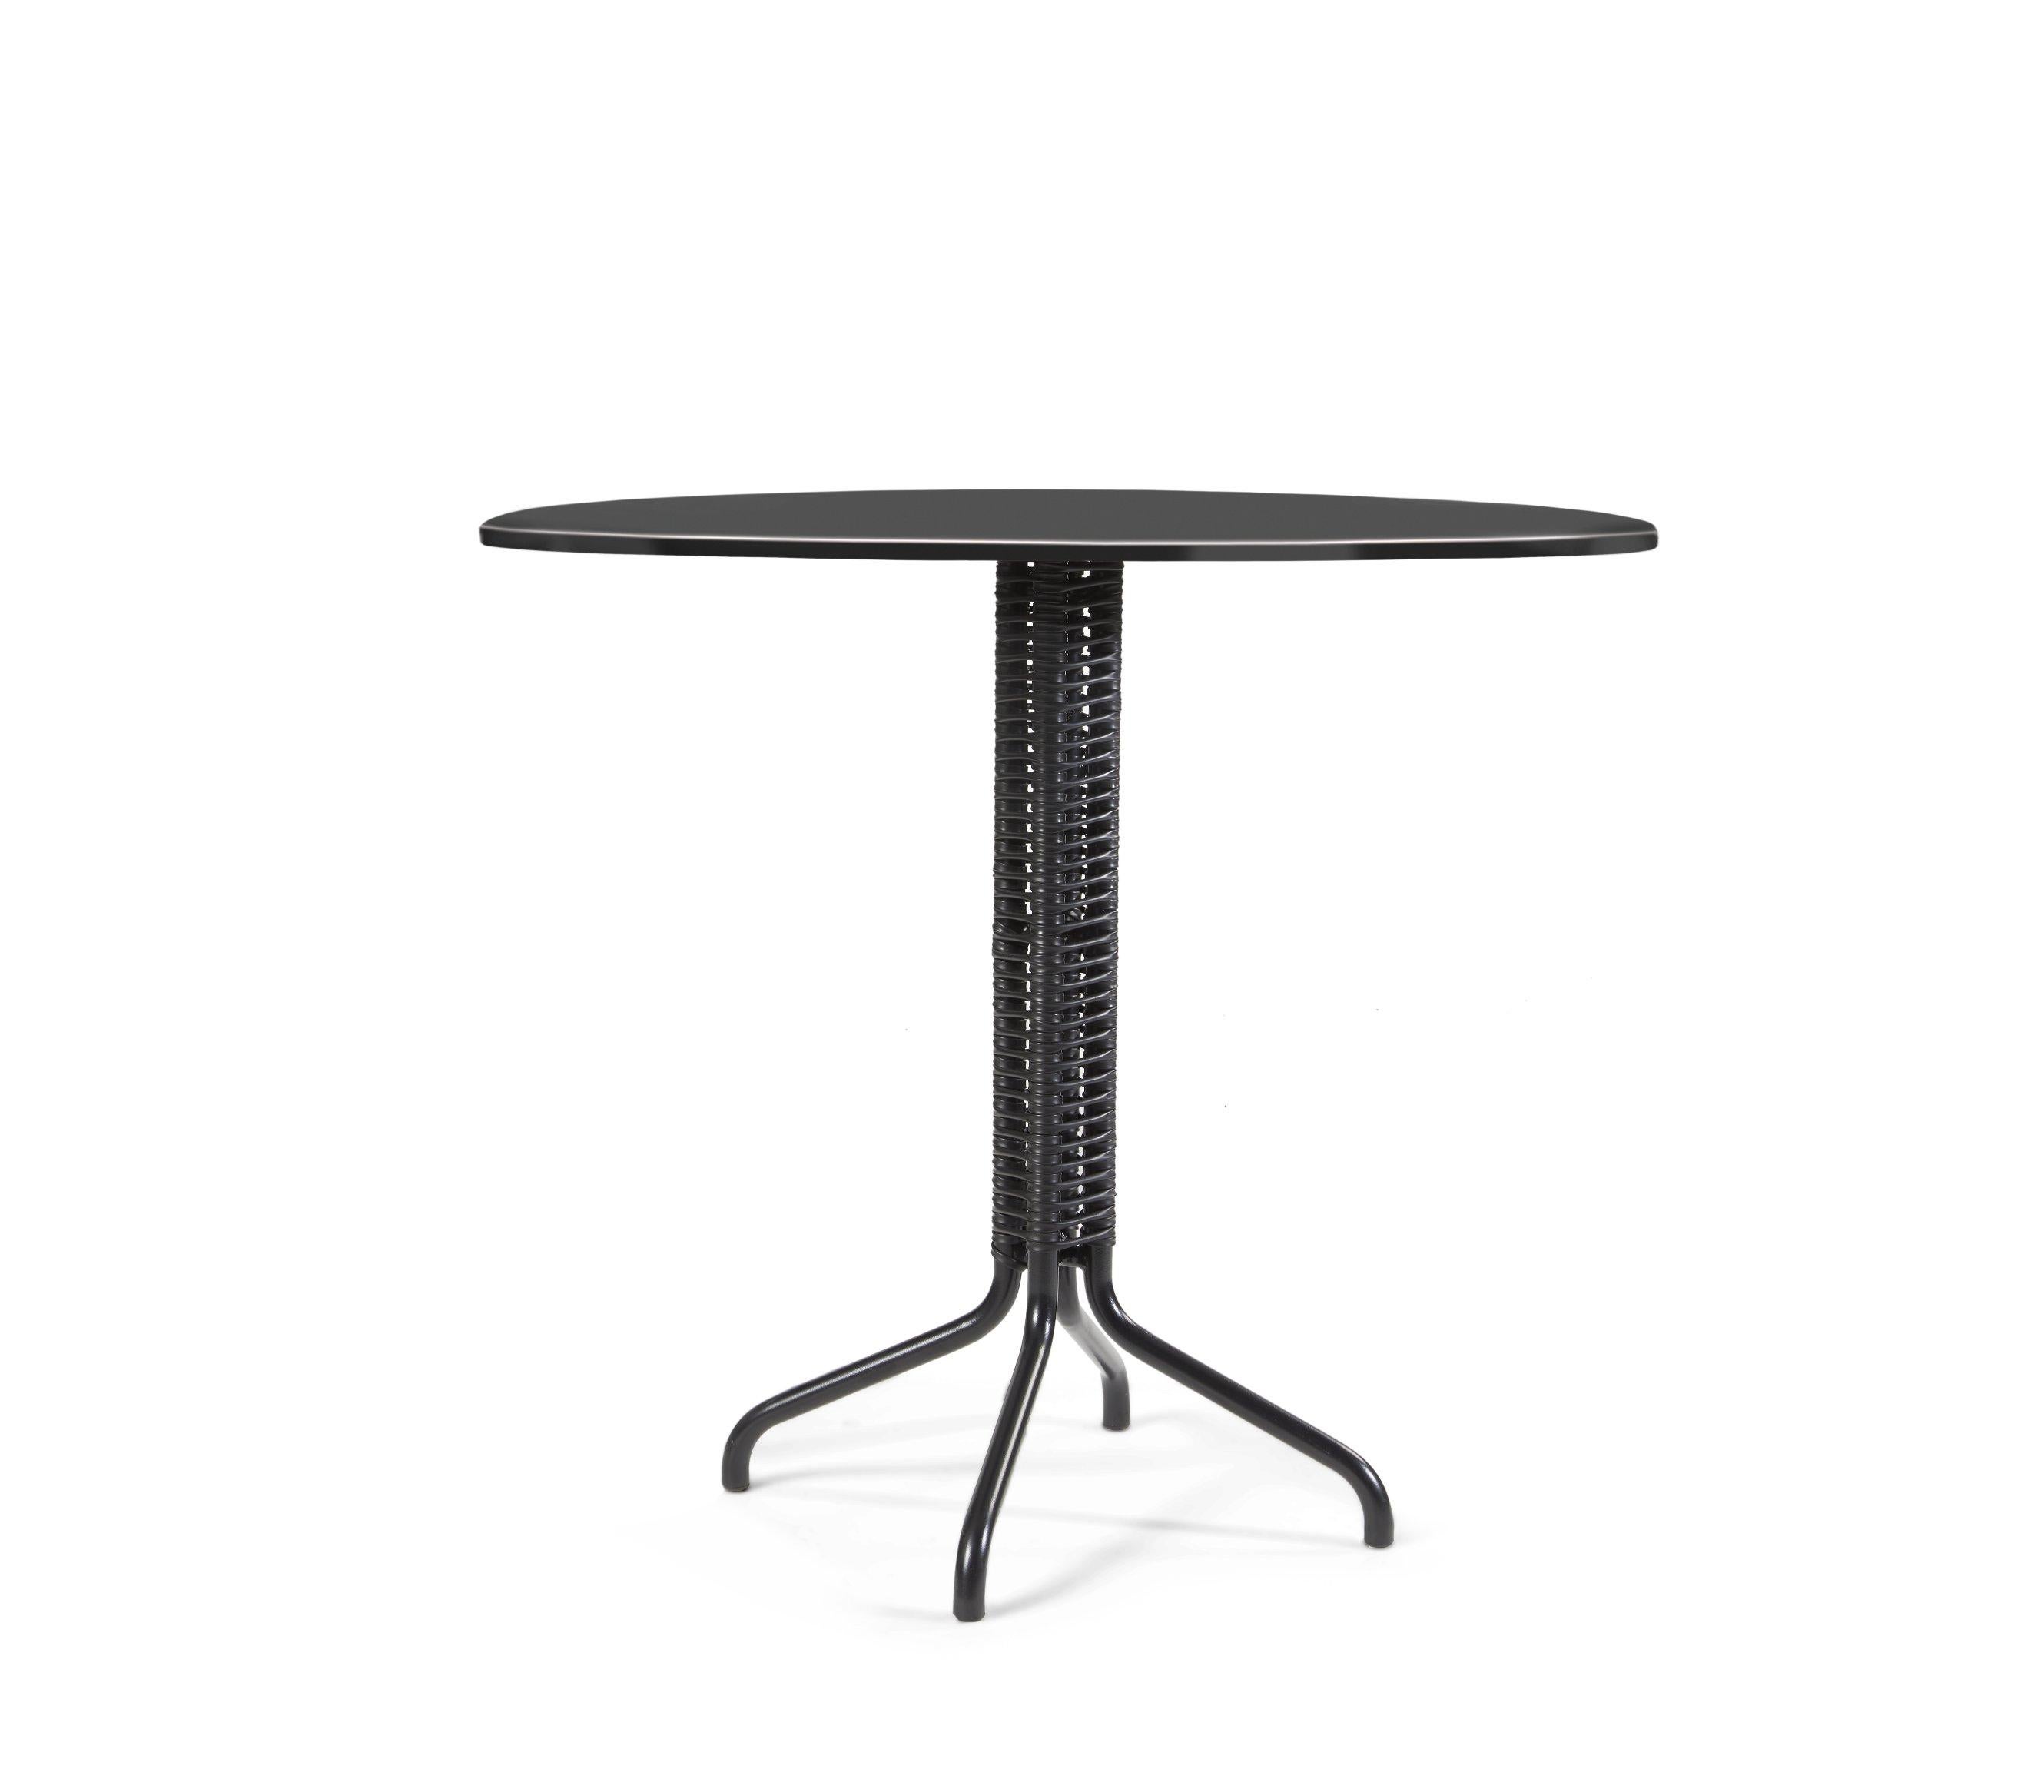 Black Cielo Bistro table by Sebastian Herkner
Dimensions: 60 x 73 x 60 cm
Materials: Metal

The popular cielo collection of chairs, loungers and lounge chairs - designed by Sebastian Herkner - is once again expanding: the elegant bistro table